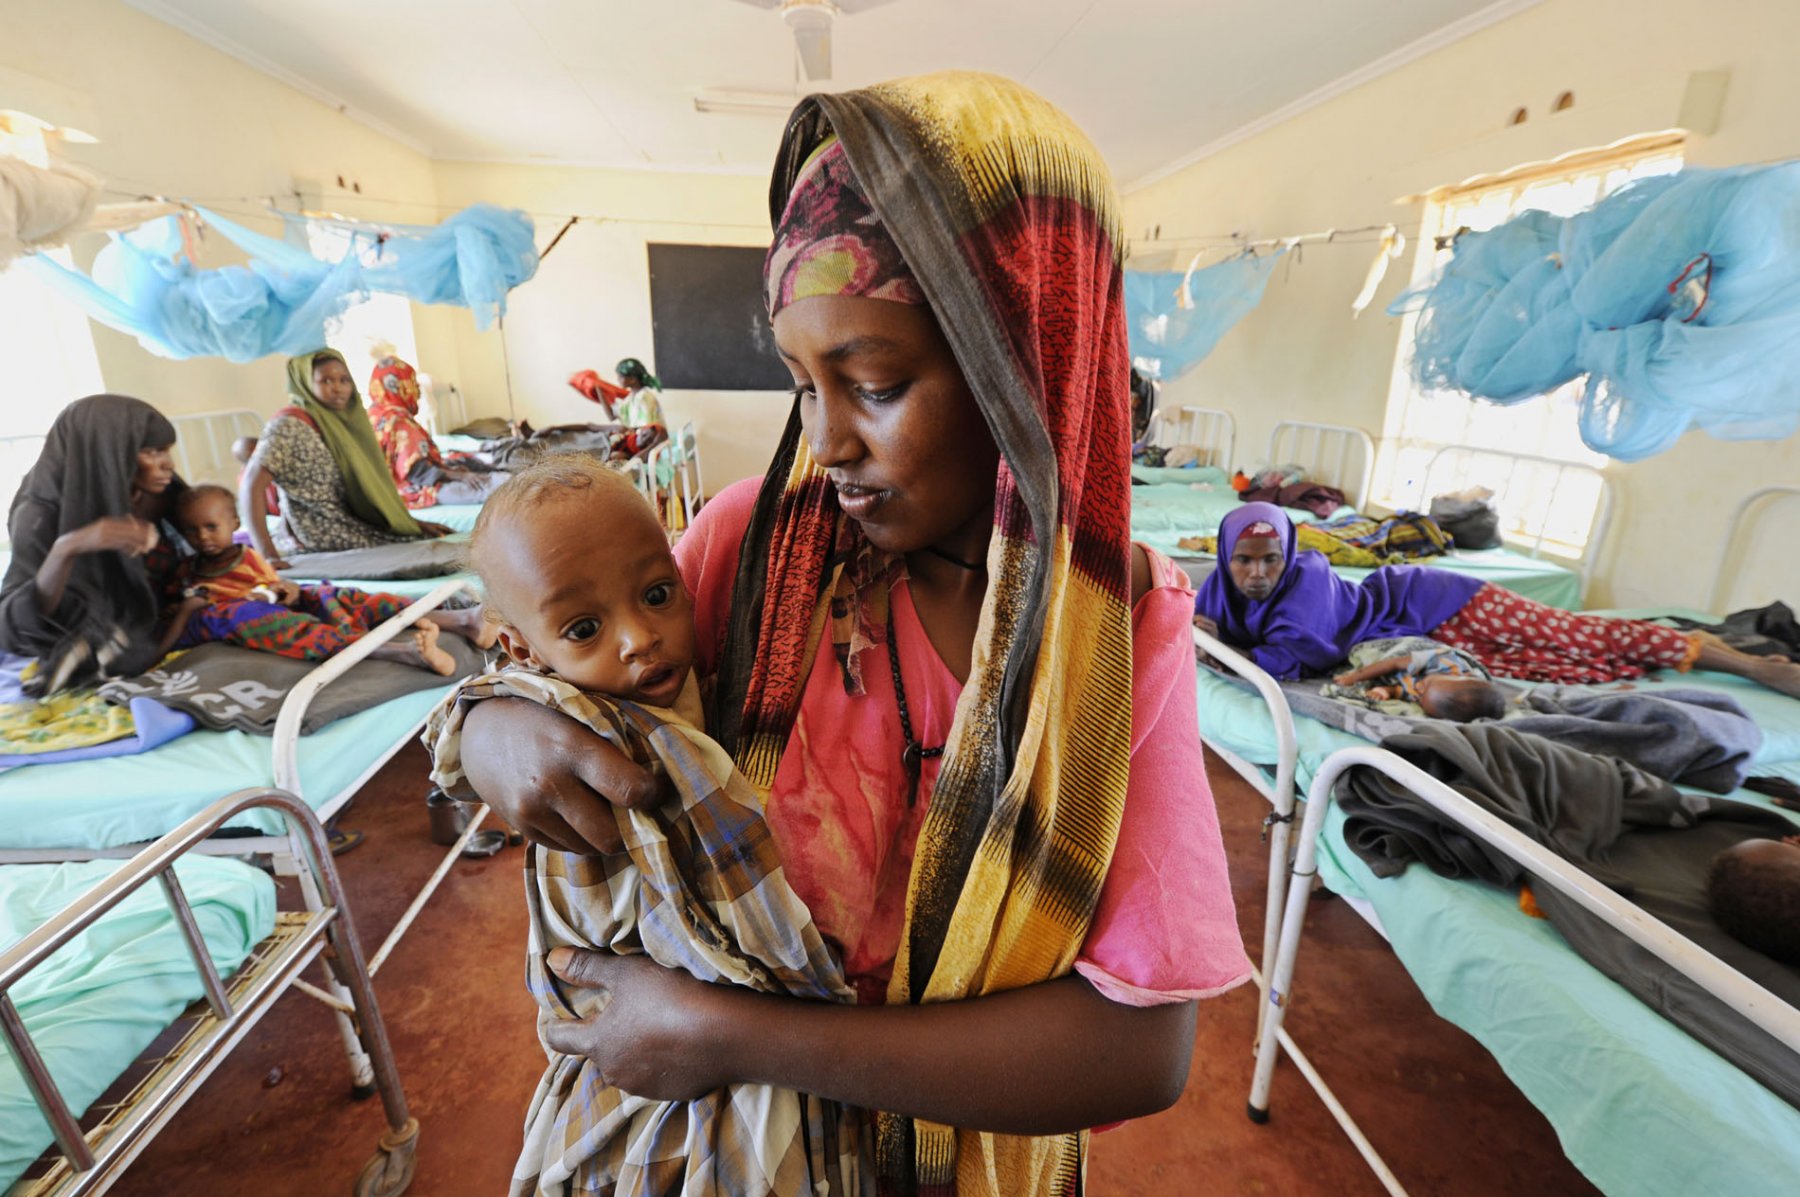 A somalian mother cradles her malnourished baby in a field hospital in a refugee camp in Dadaab, northeastern Kenya on Wednesday, August 3rd 2011. Somalia and parts of Kenya have been struck by one of the worst droughts and famines in six decades, more than 350.000 refugees have found shelter in the worlds biggest refugee camp. Foto: Boris Roessler dpa  +++(c) dpa - Bildfunk+++